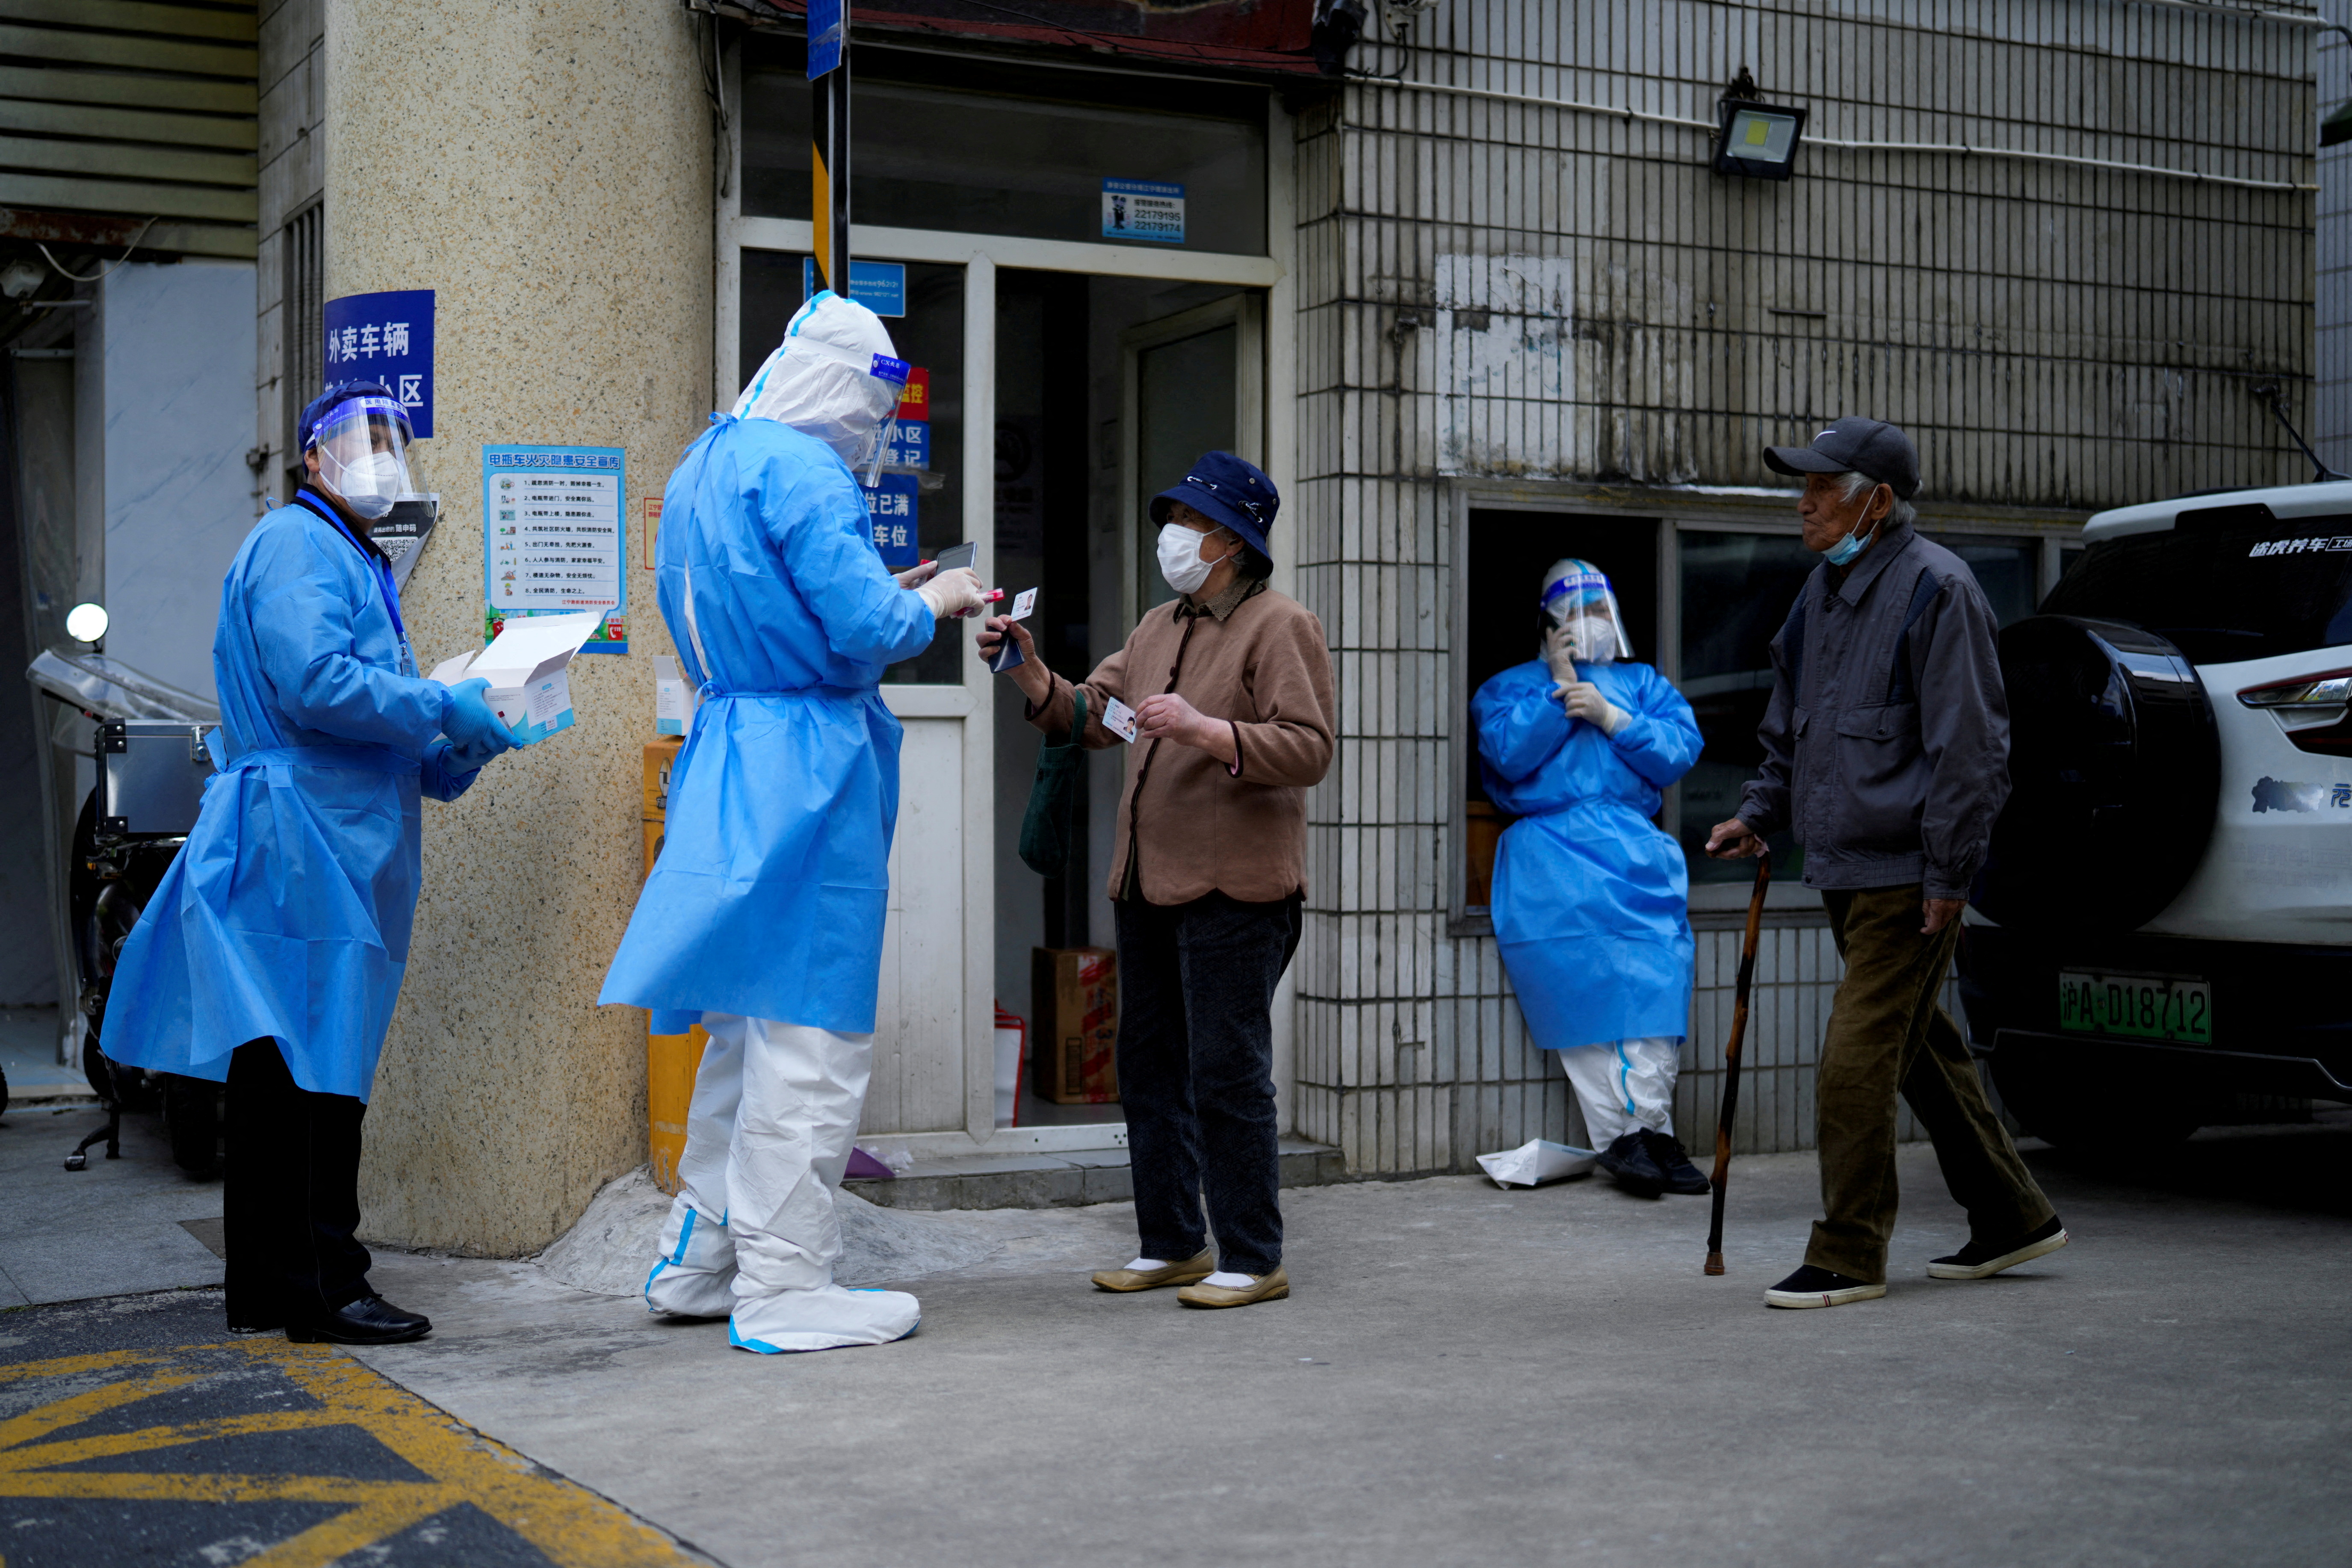 : Residents line up for nucleic acid tests during lockdown, amid the coronavirus disease (COVID-19) pandemic, in Shanghai, China, April 30, 2022.